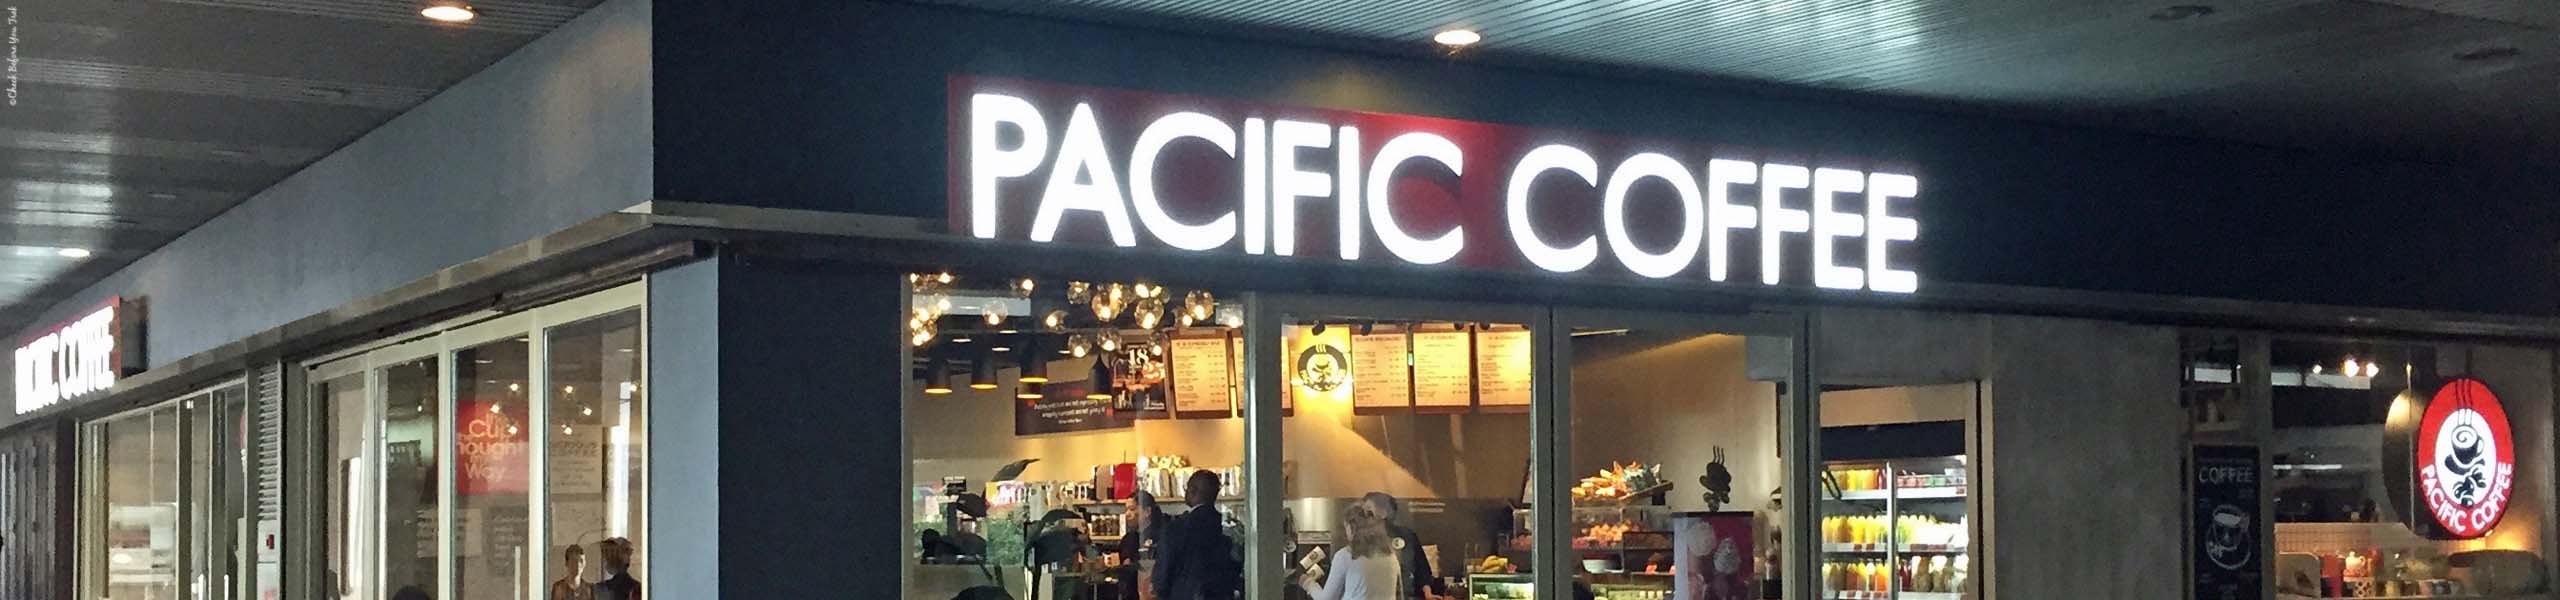 Front of a Pacific Coffee in Hong Kong, China